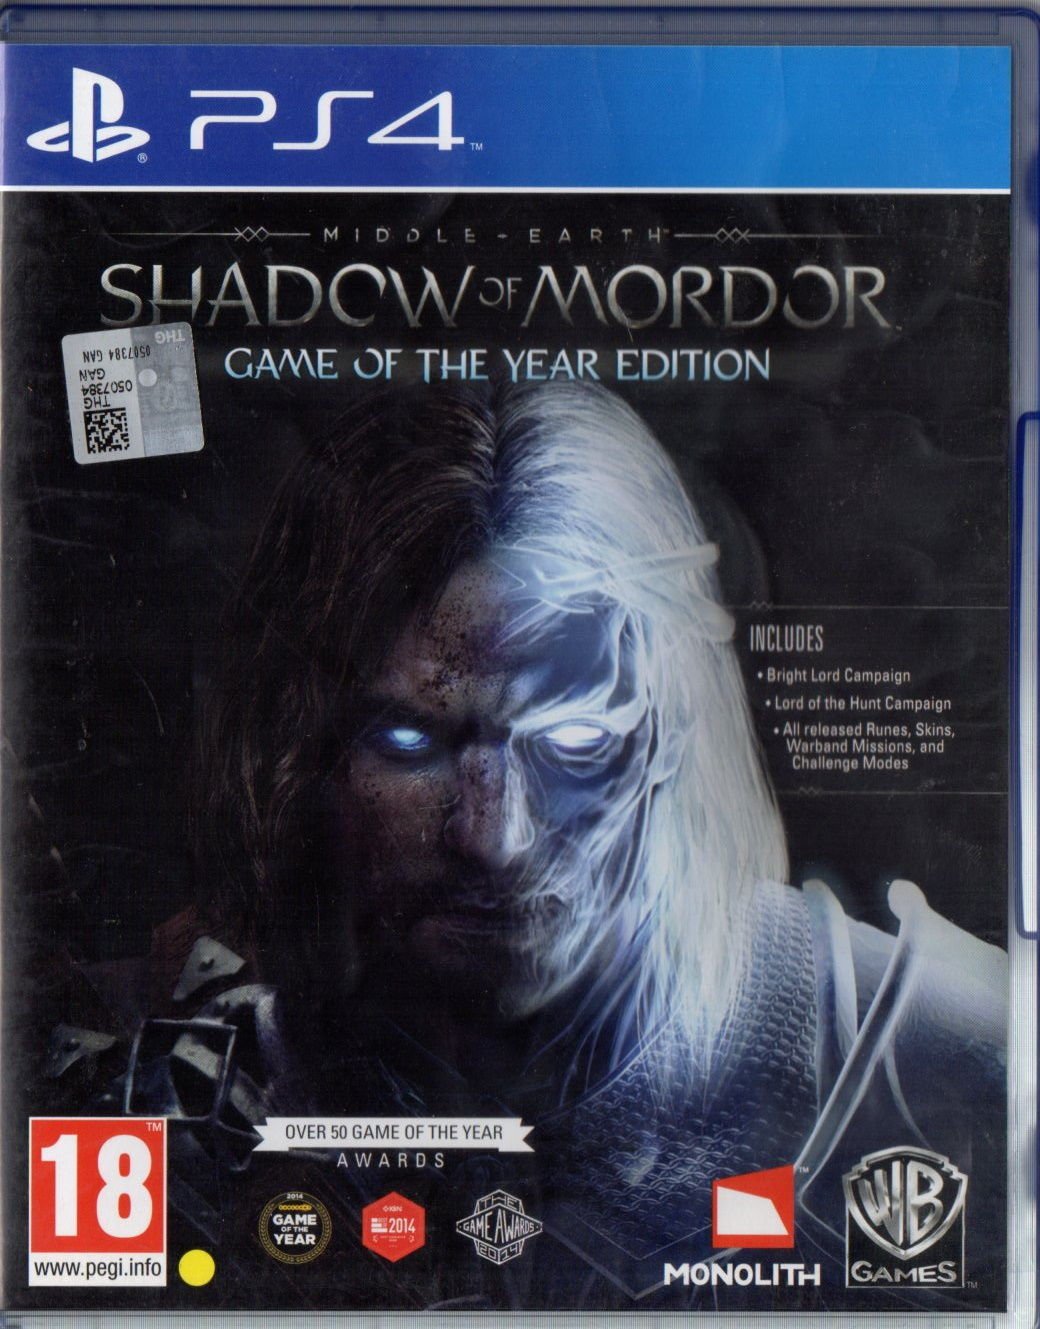 MIDDLE EARTH: SHADOW OF MORDOR GAME OF THE YEAR EDITION - PS4 PLAYSTATION 4 OYUNU 2.EL